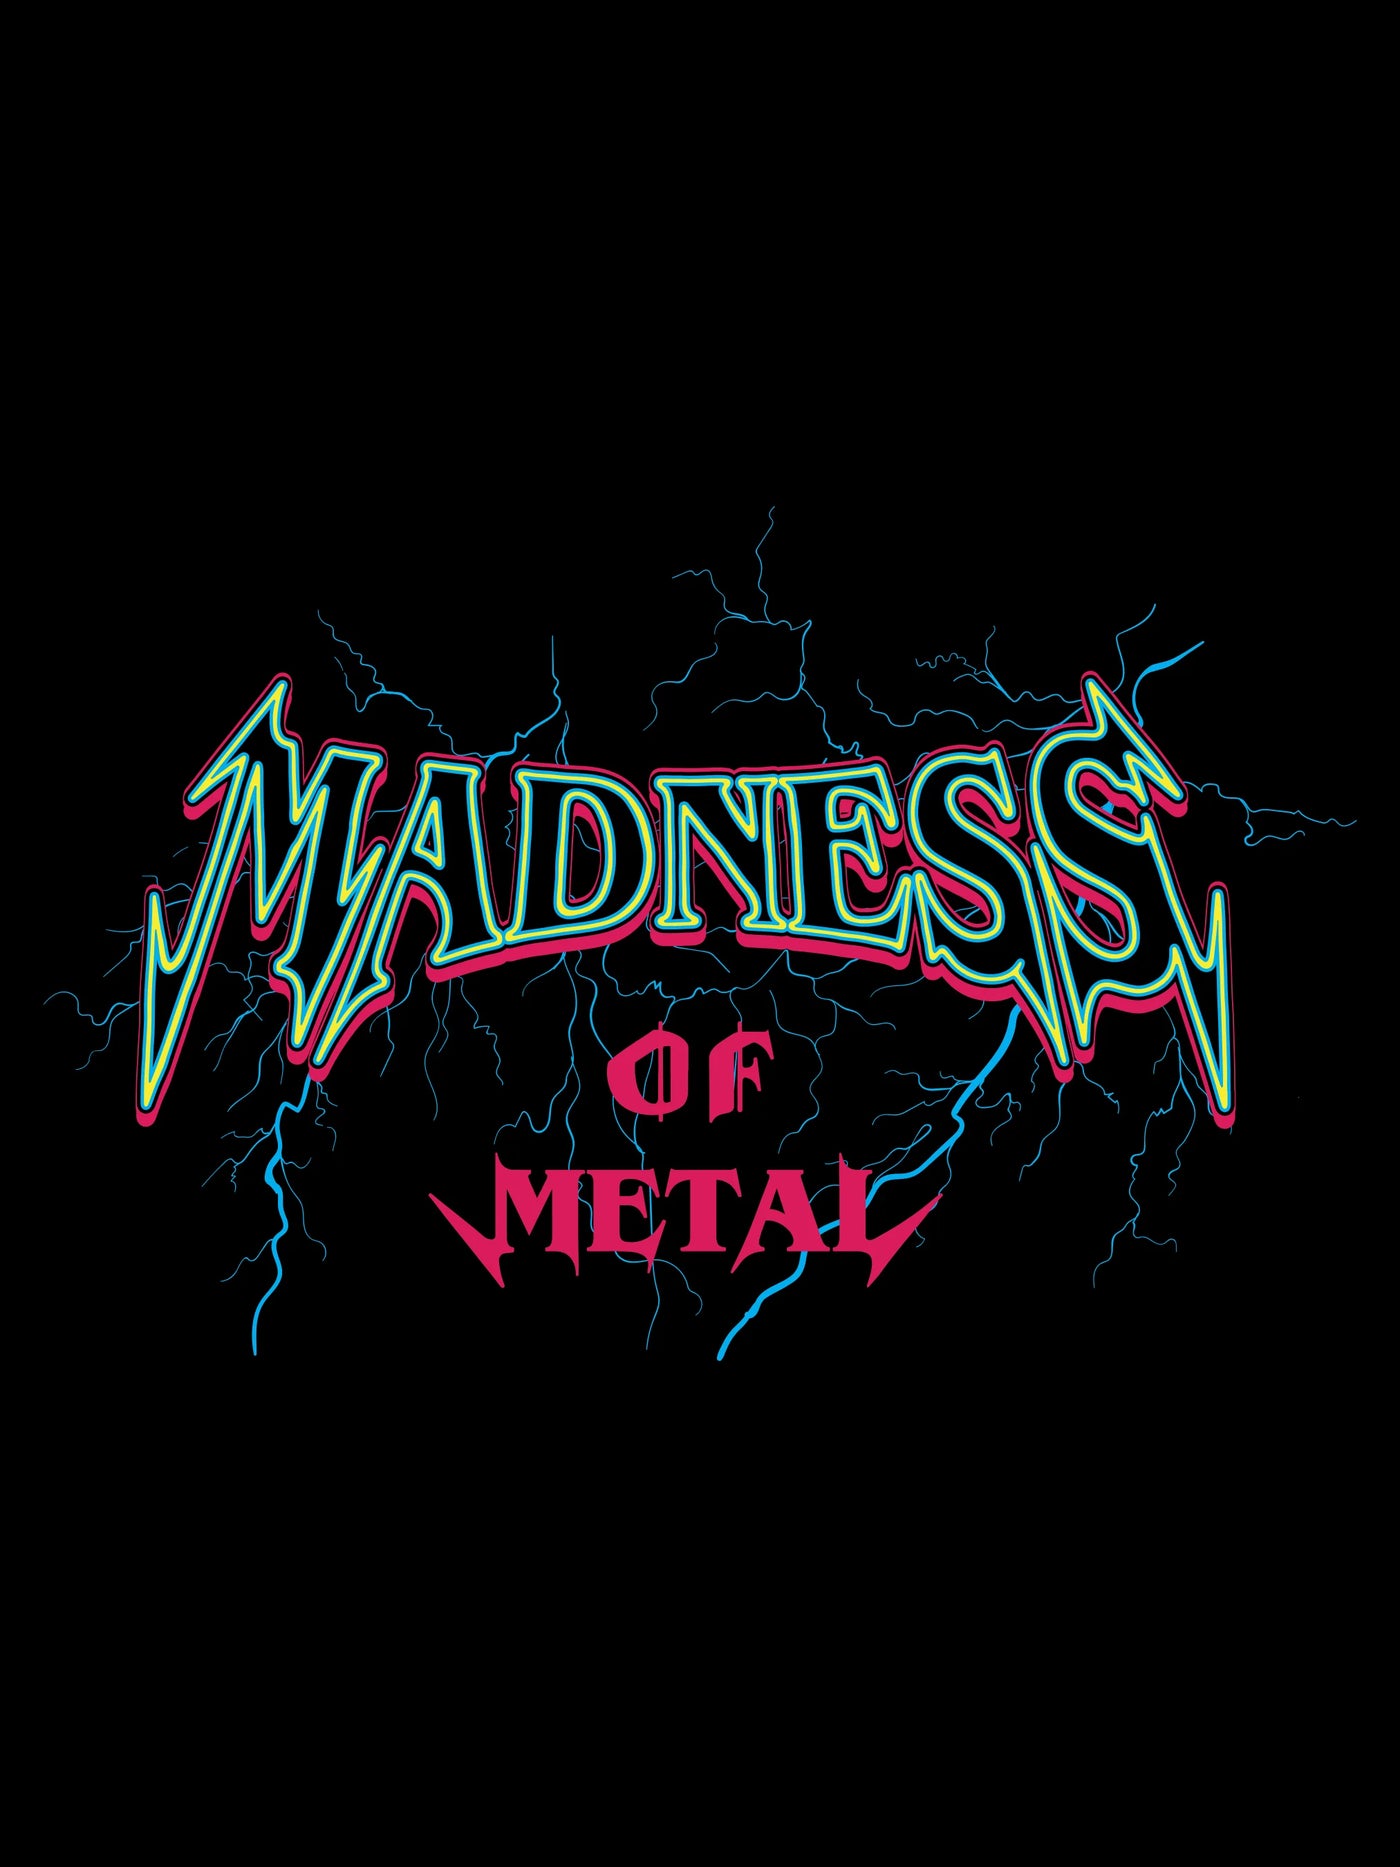 Madness of metal- Unisex T-Shirt